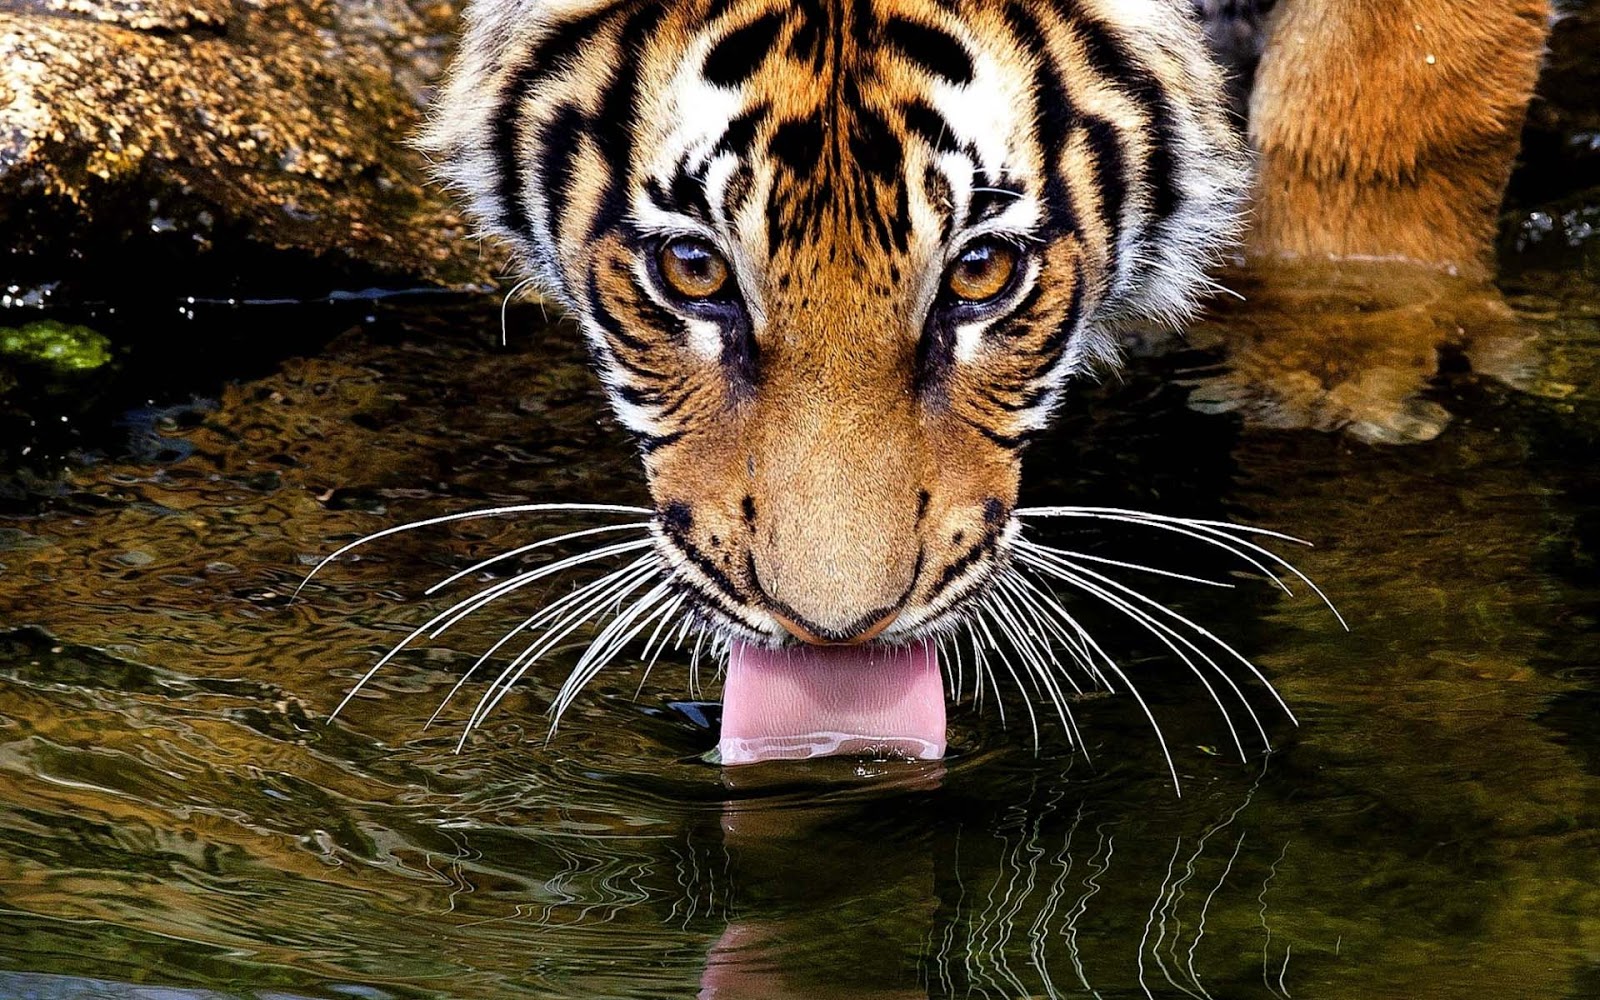 HD Animal Wallpaper Of A Tiger Drinking Water Tigers